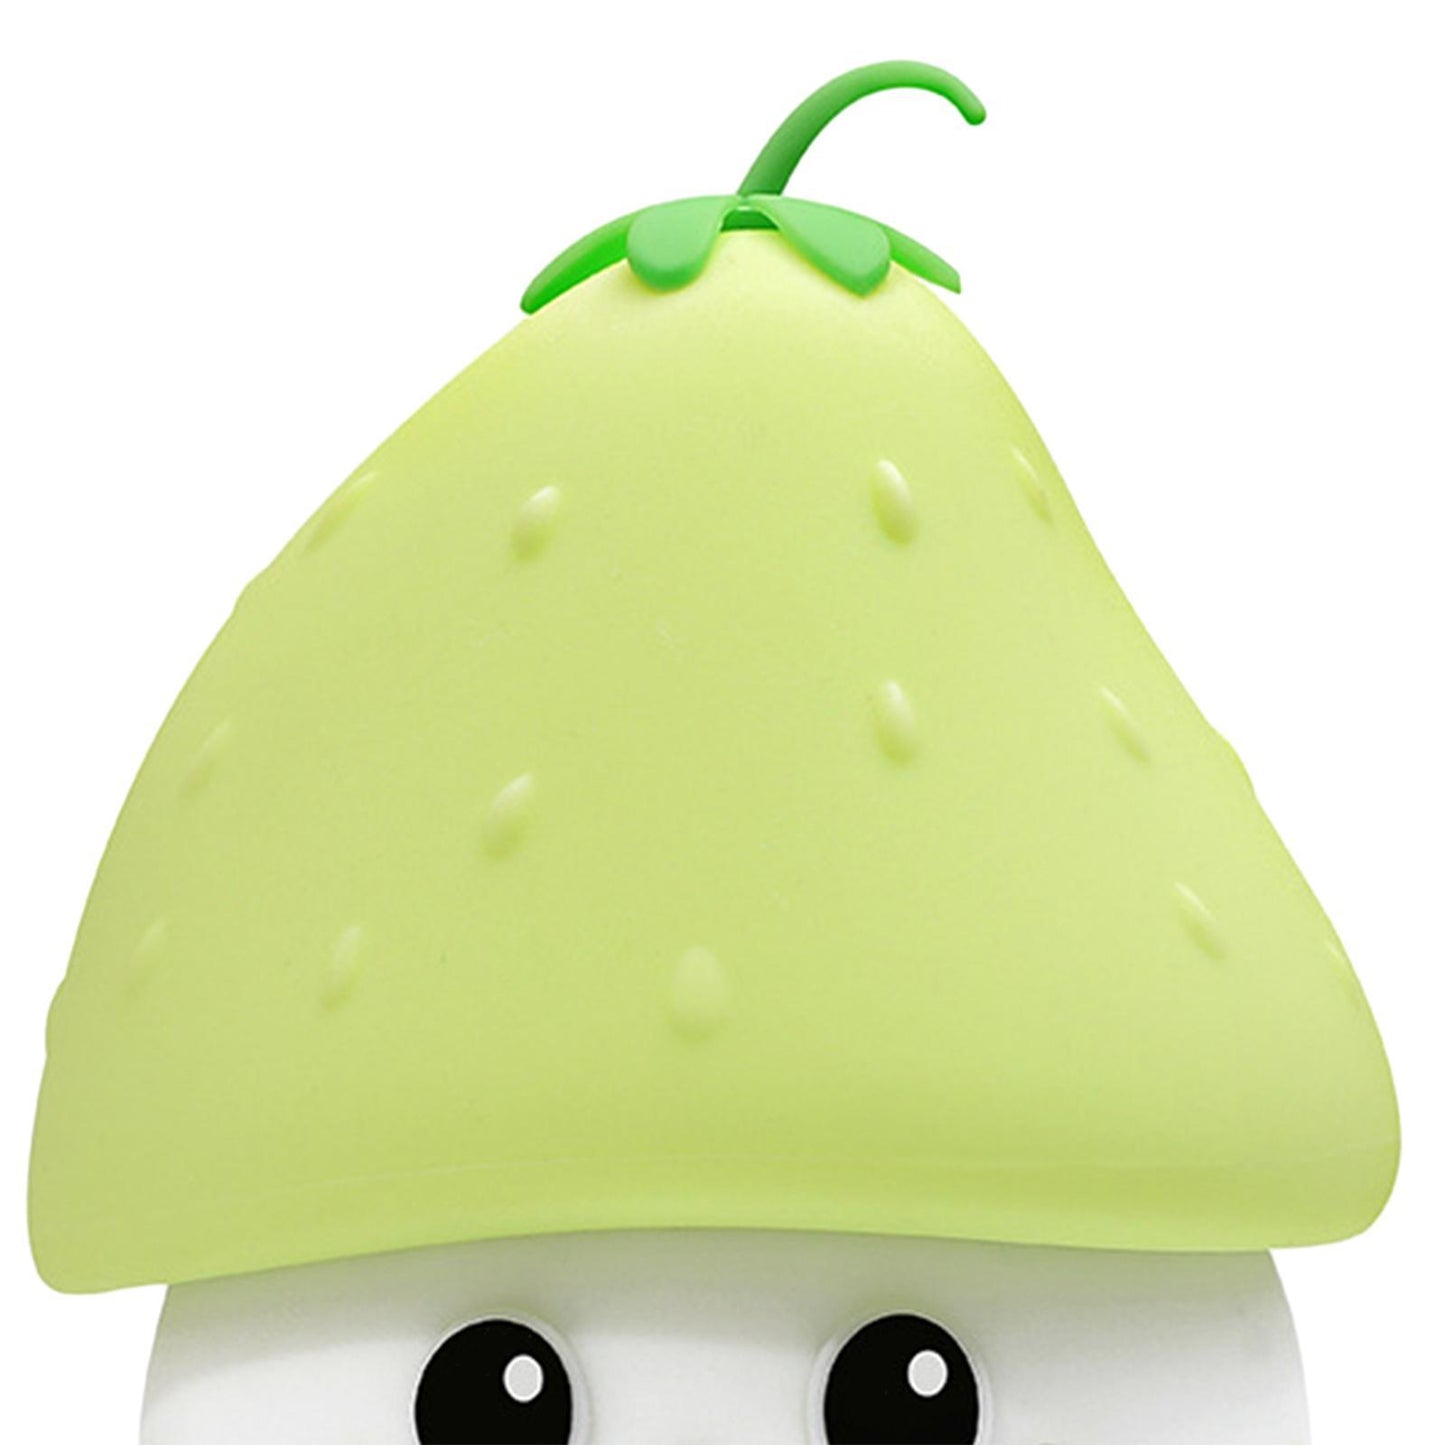 Strawberry Silicone Touch Night Lamp